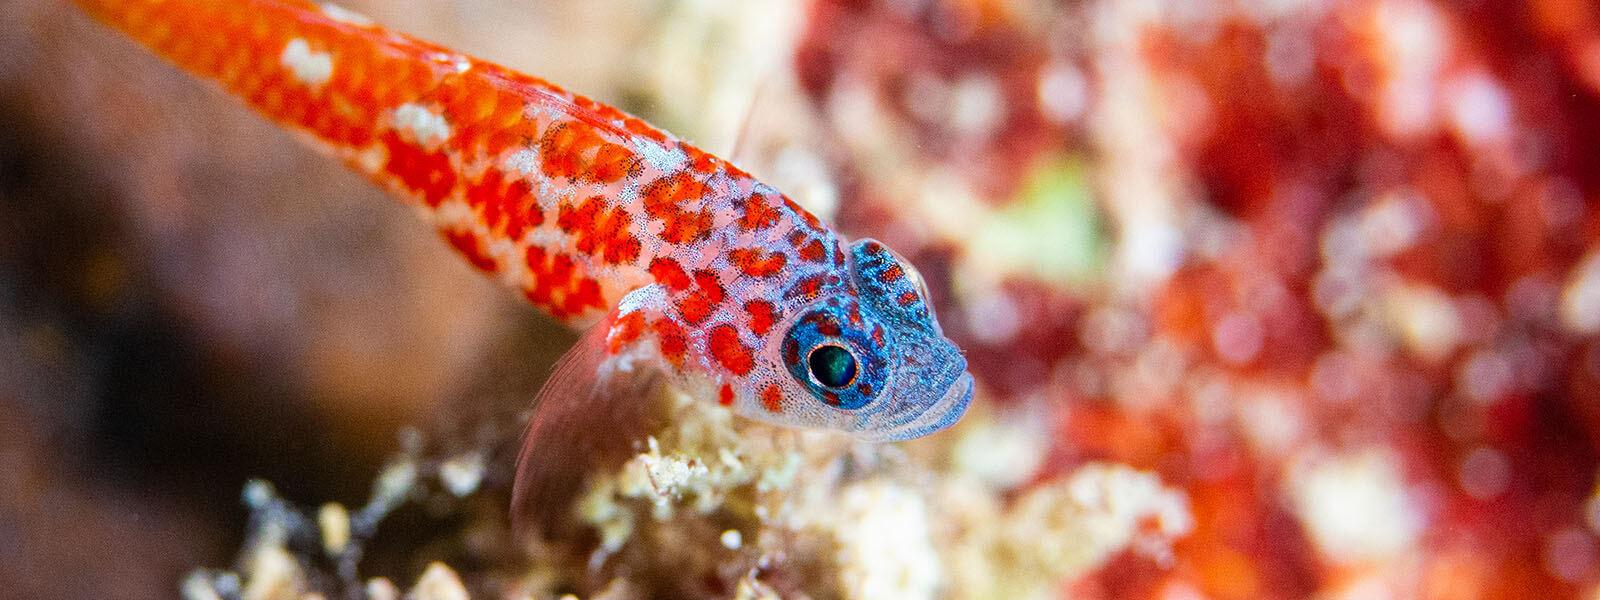 Small blennies and gobies can be very colorful in places like Raja Ampat and Alor